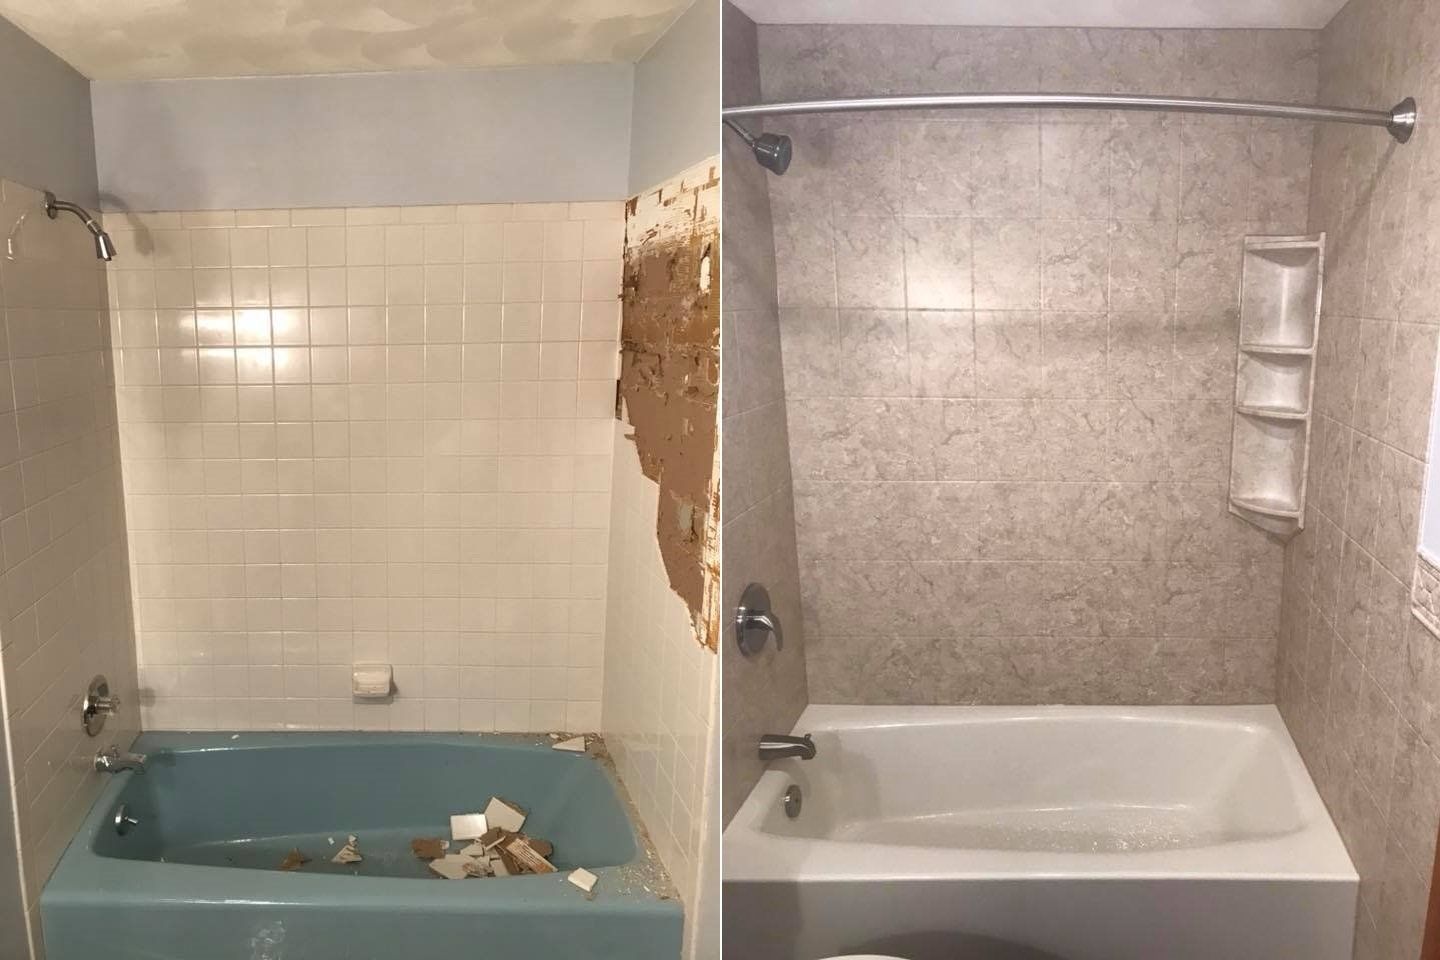 Before & After (Tub & Walls)